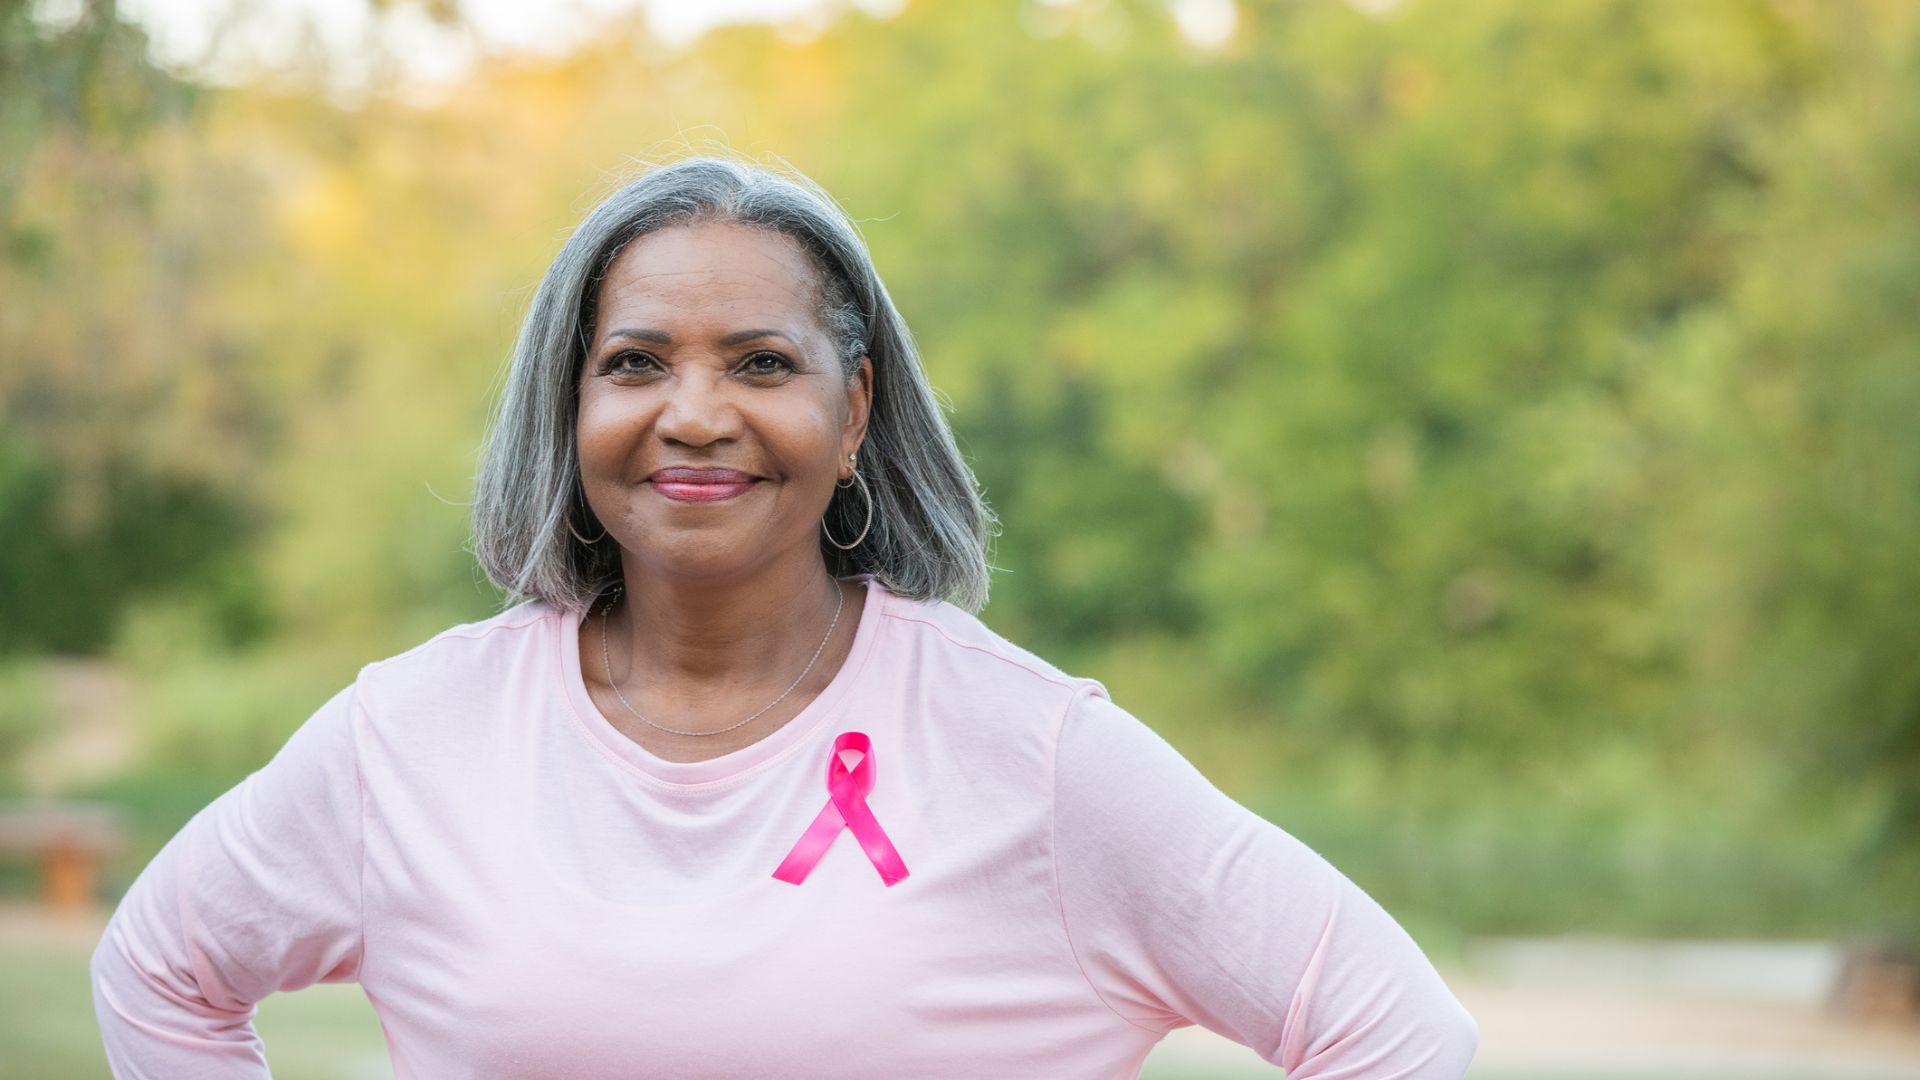 Woman wearing pink shirt with pink breast cancer ribbon, smiling in front of green foliage.